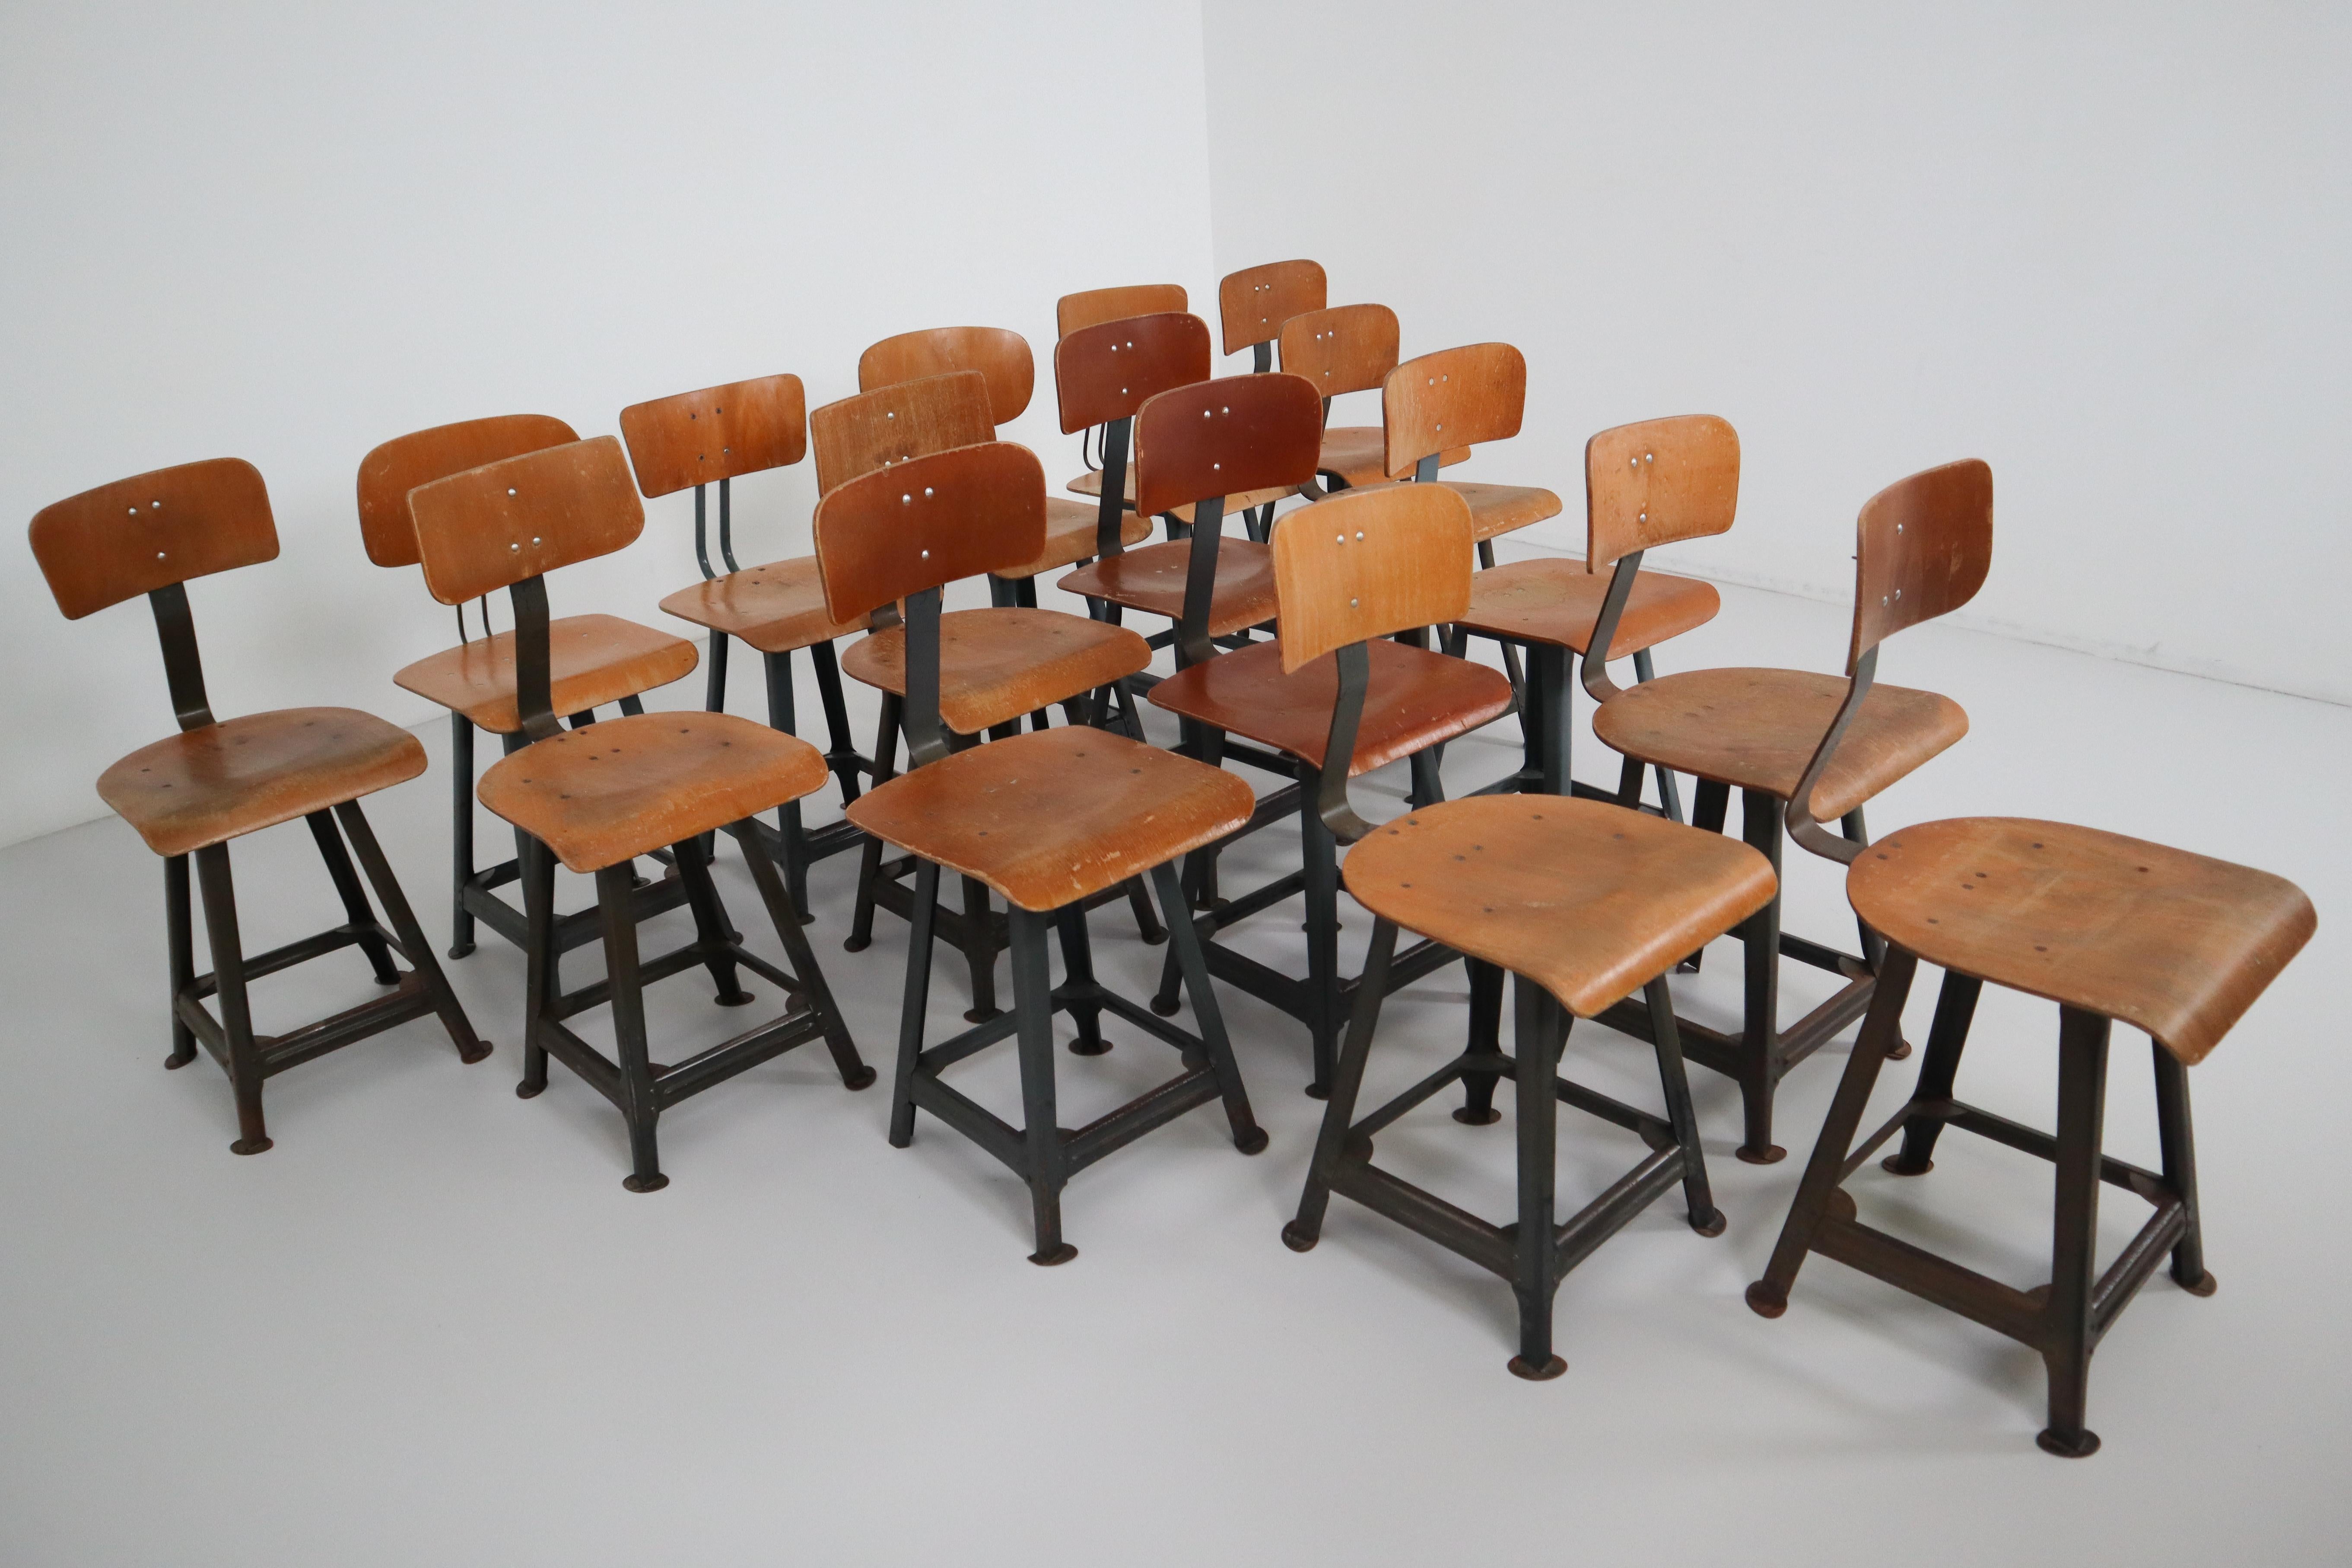 16 Industrial Chairs by Robert Wagner for Bemefa, Rowac, Germany, 1950s 4